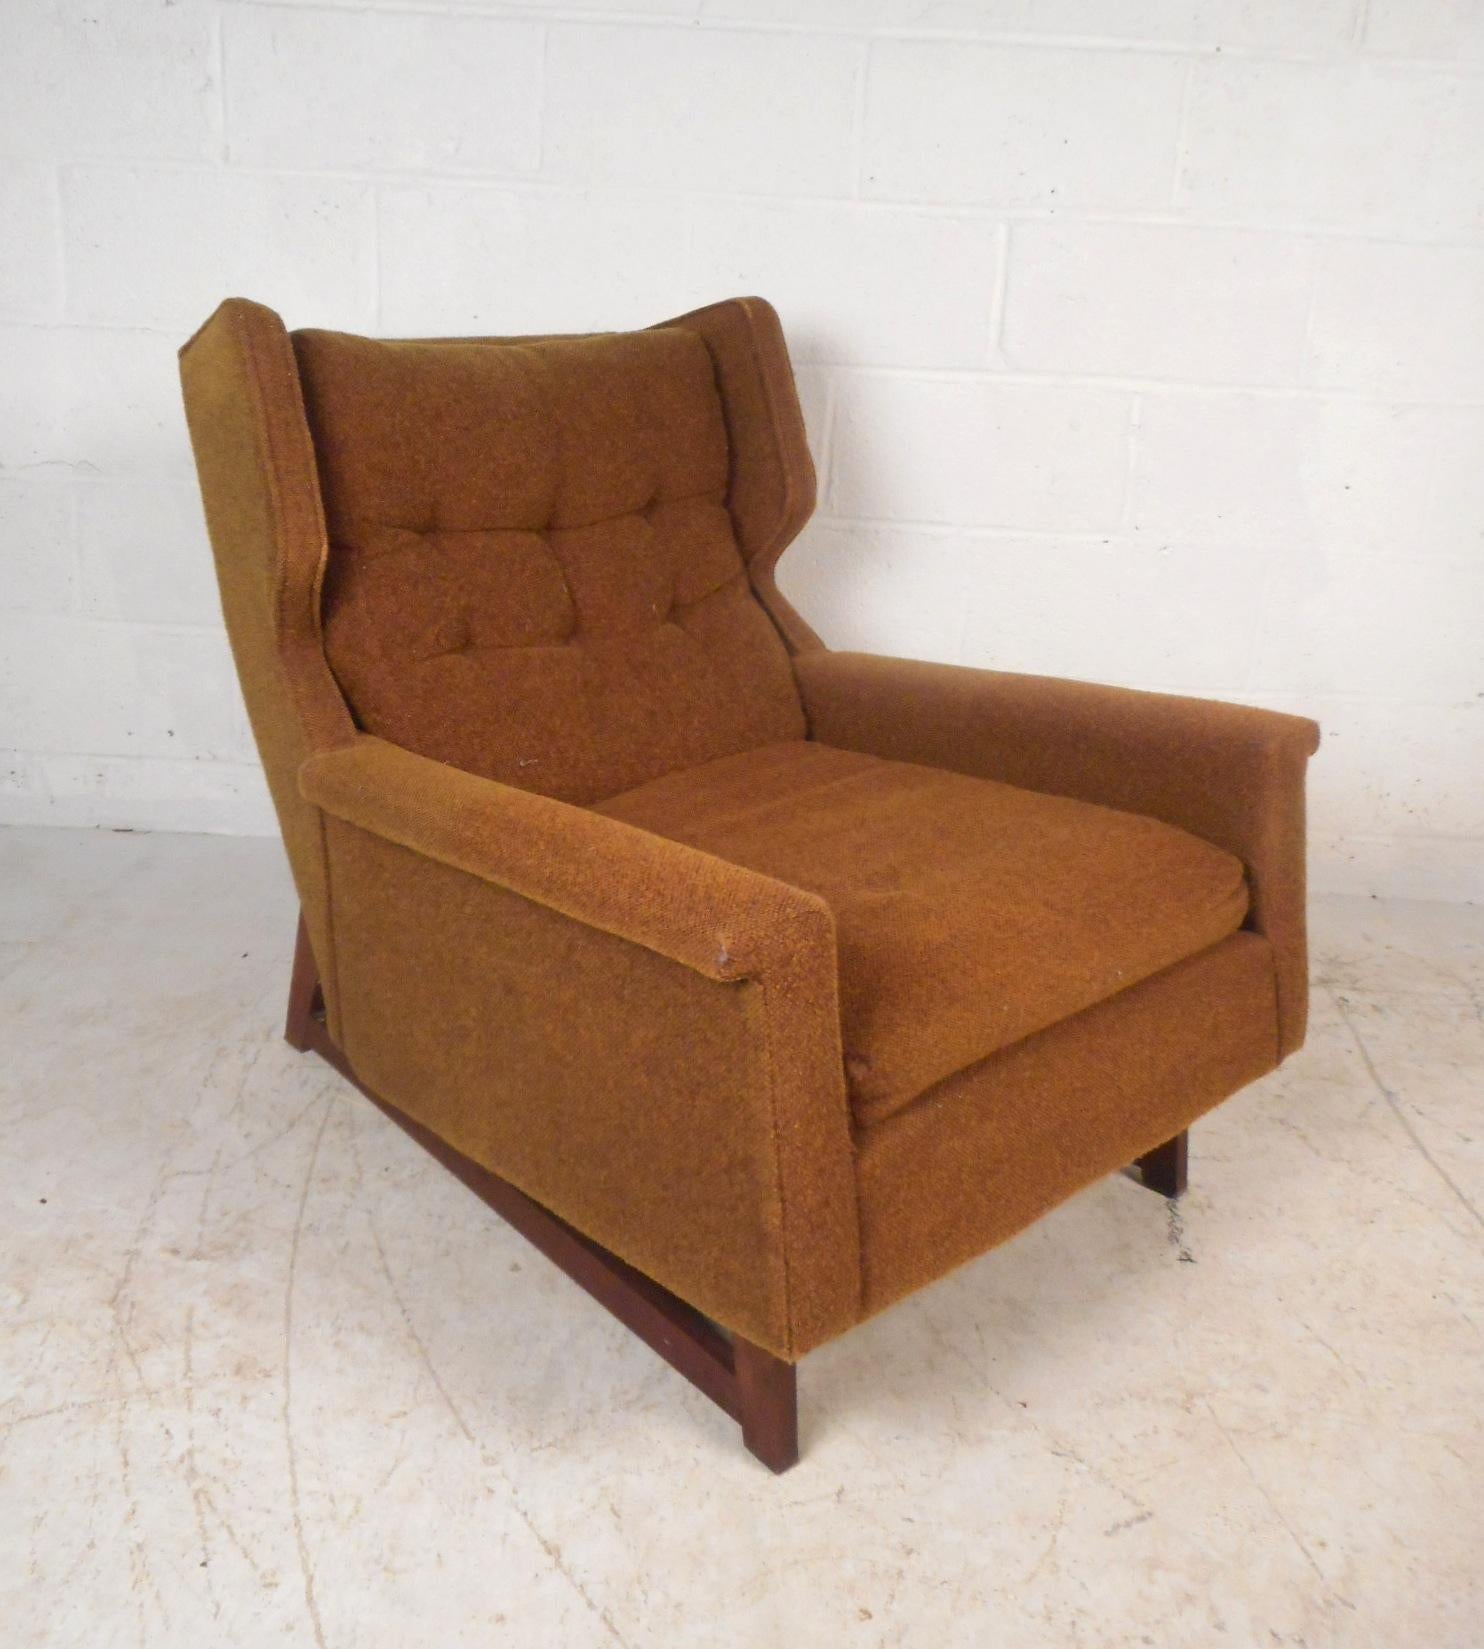 This beautiful vintage modern lounge chair features walnut sled legs, a winged back rest, and plush tufted upholstery. The sleek design sits on an angle ensuring maximum comfort in any seating arrangement. An original orange fabric with tufts cover